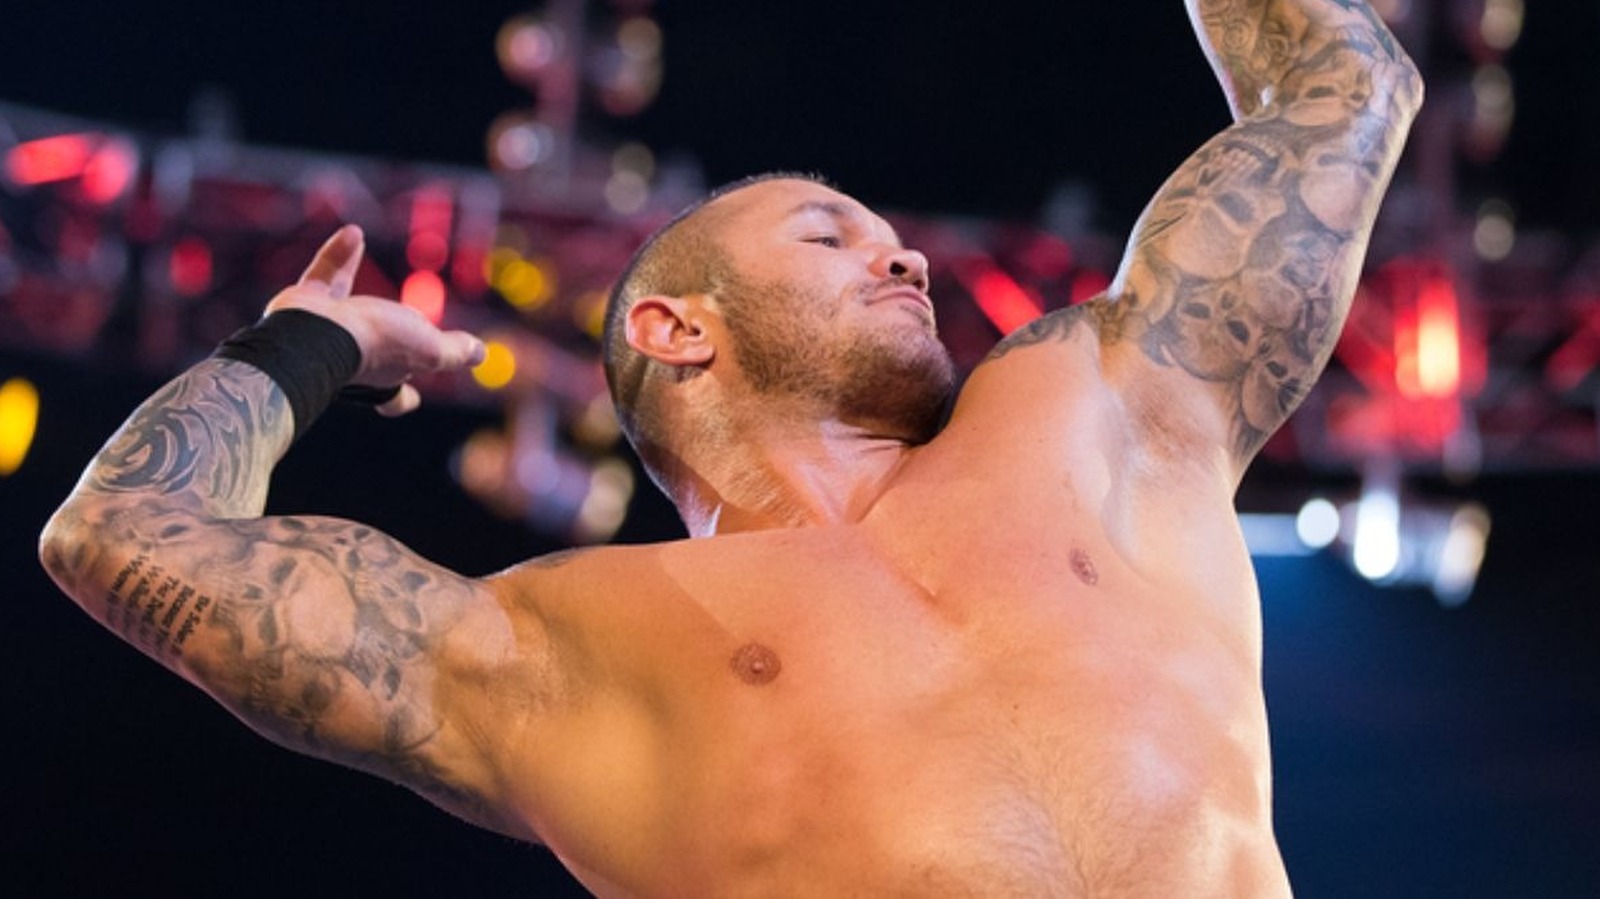 Randy Orton Wins First WWE Raw Match In Over A Year (With Help From Singer Jelly Roll)